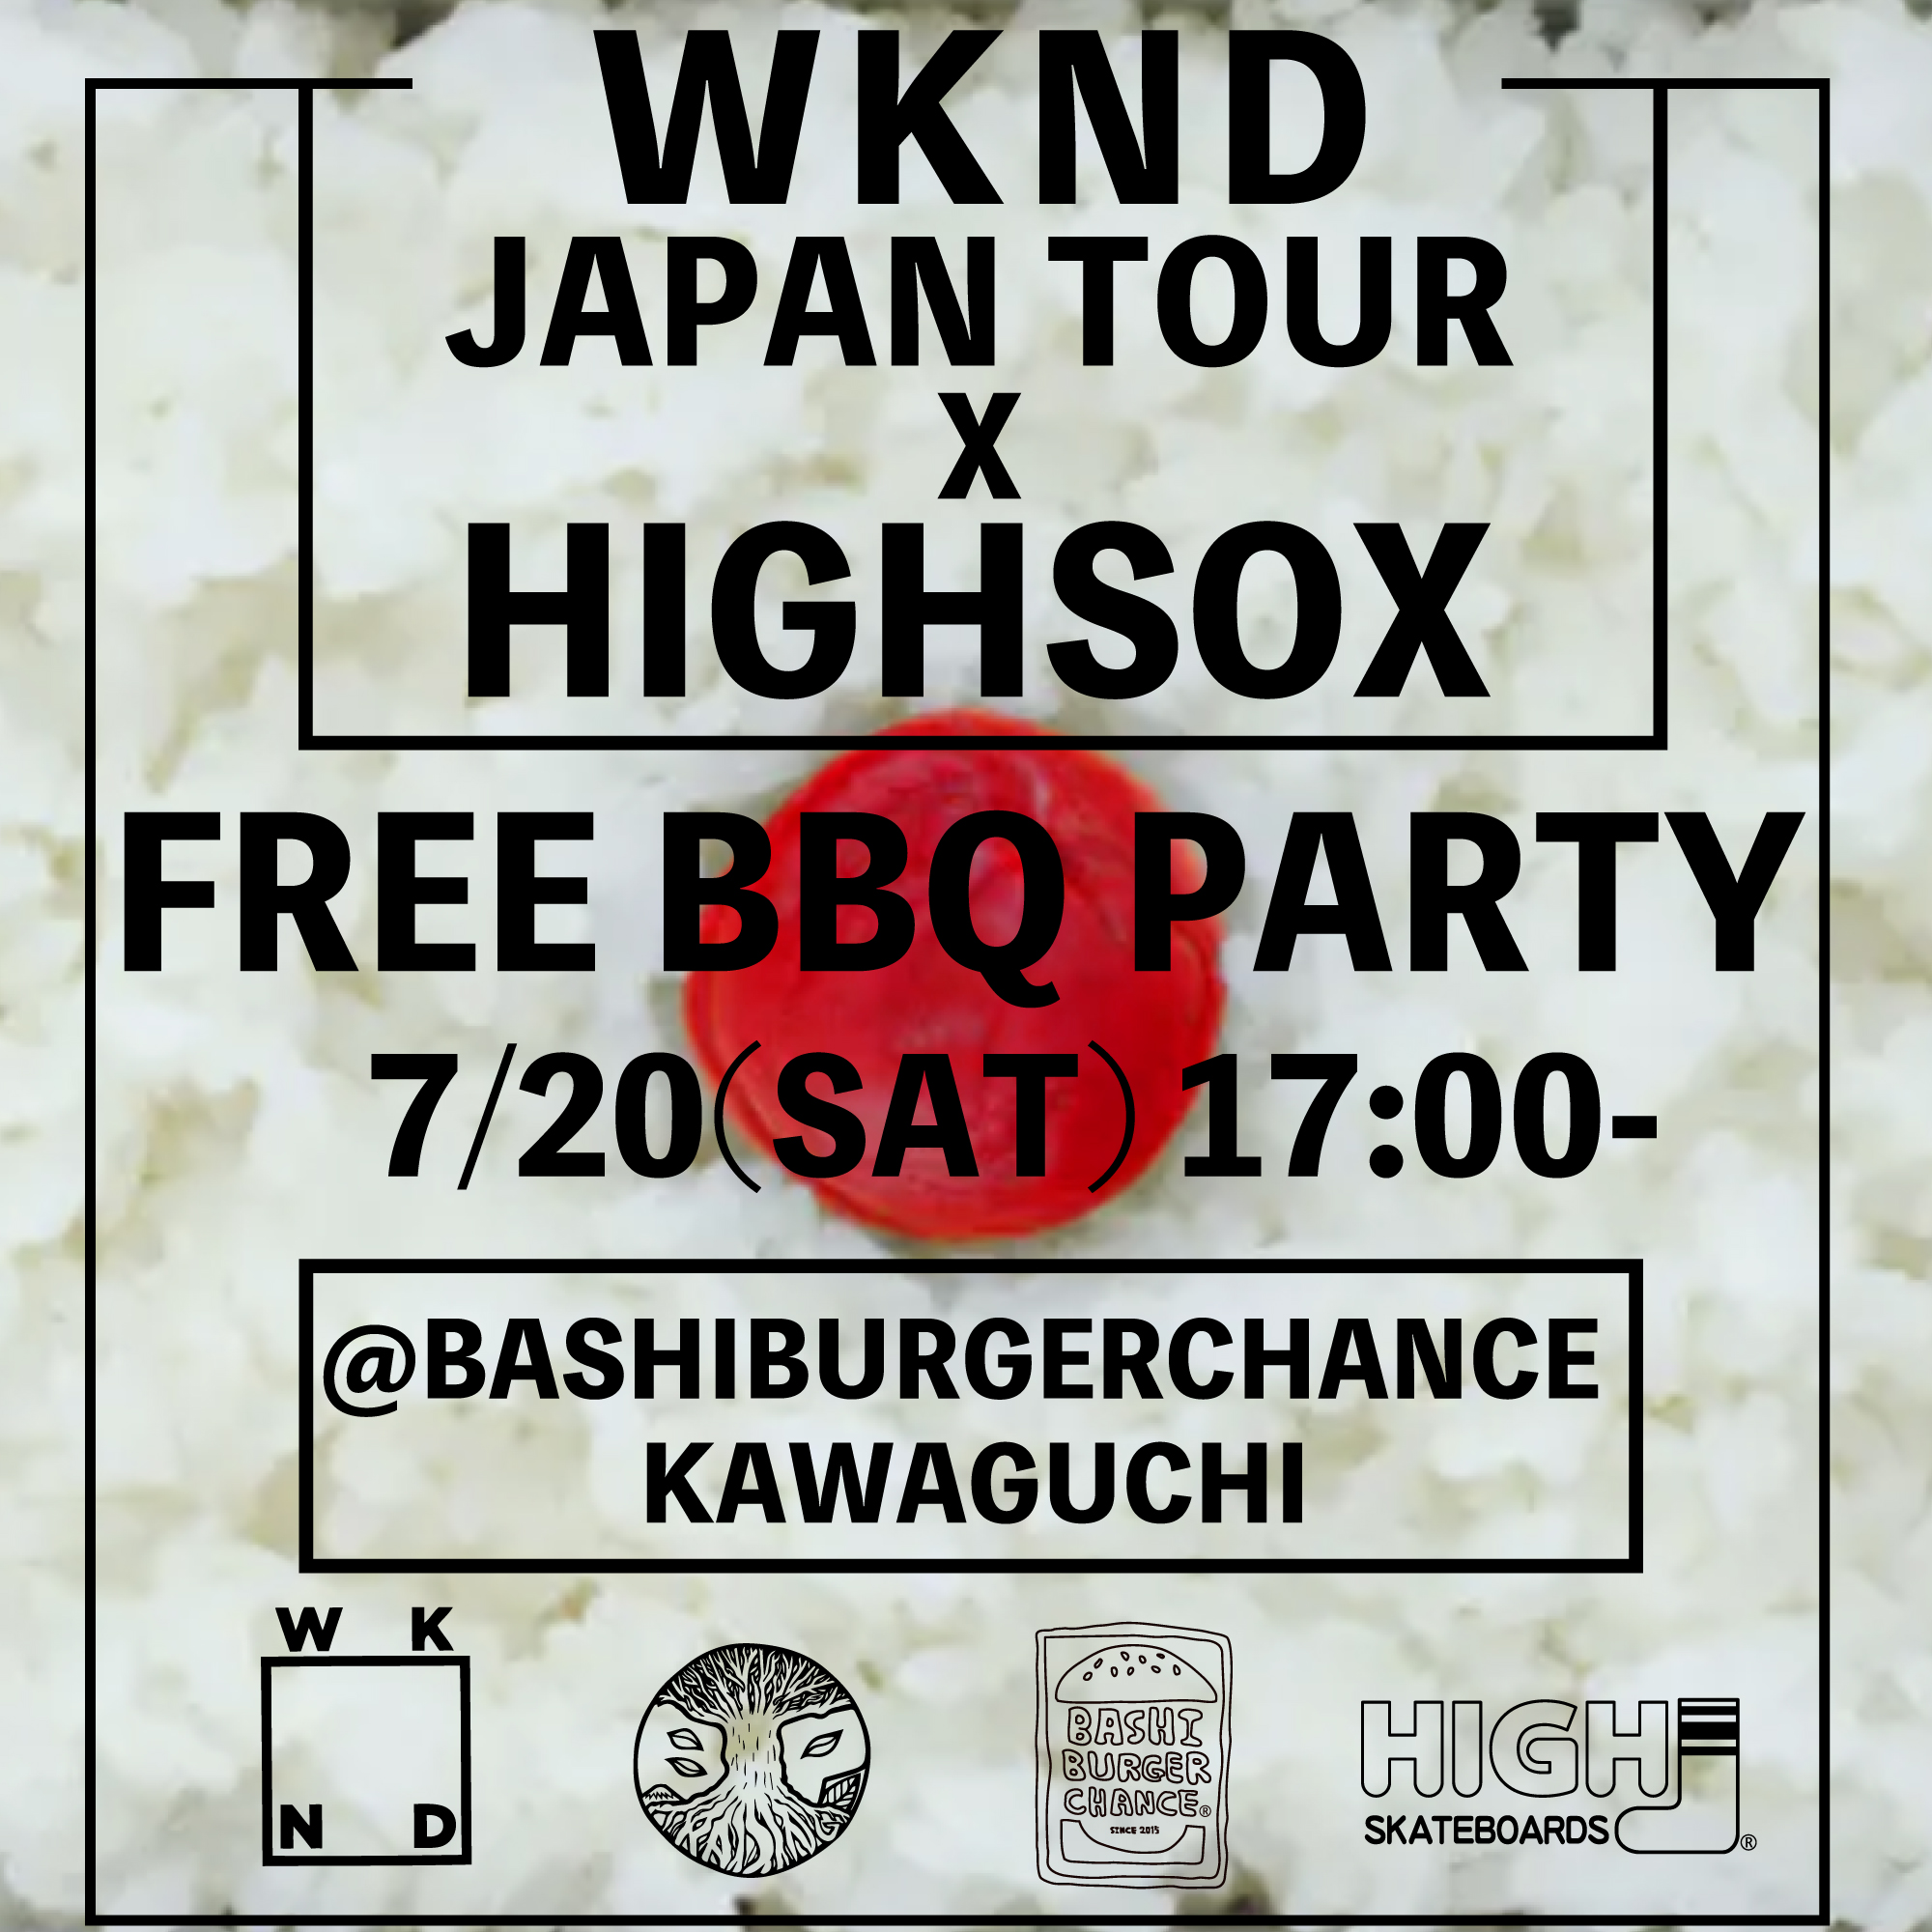 7/21 FREE BBQ PARTY